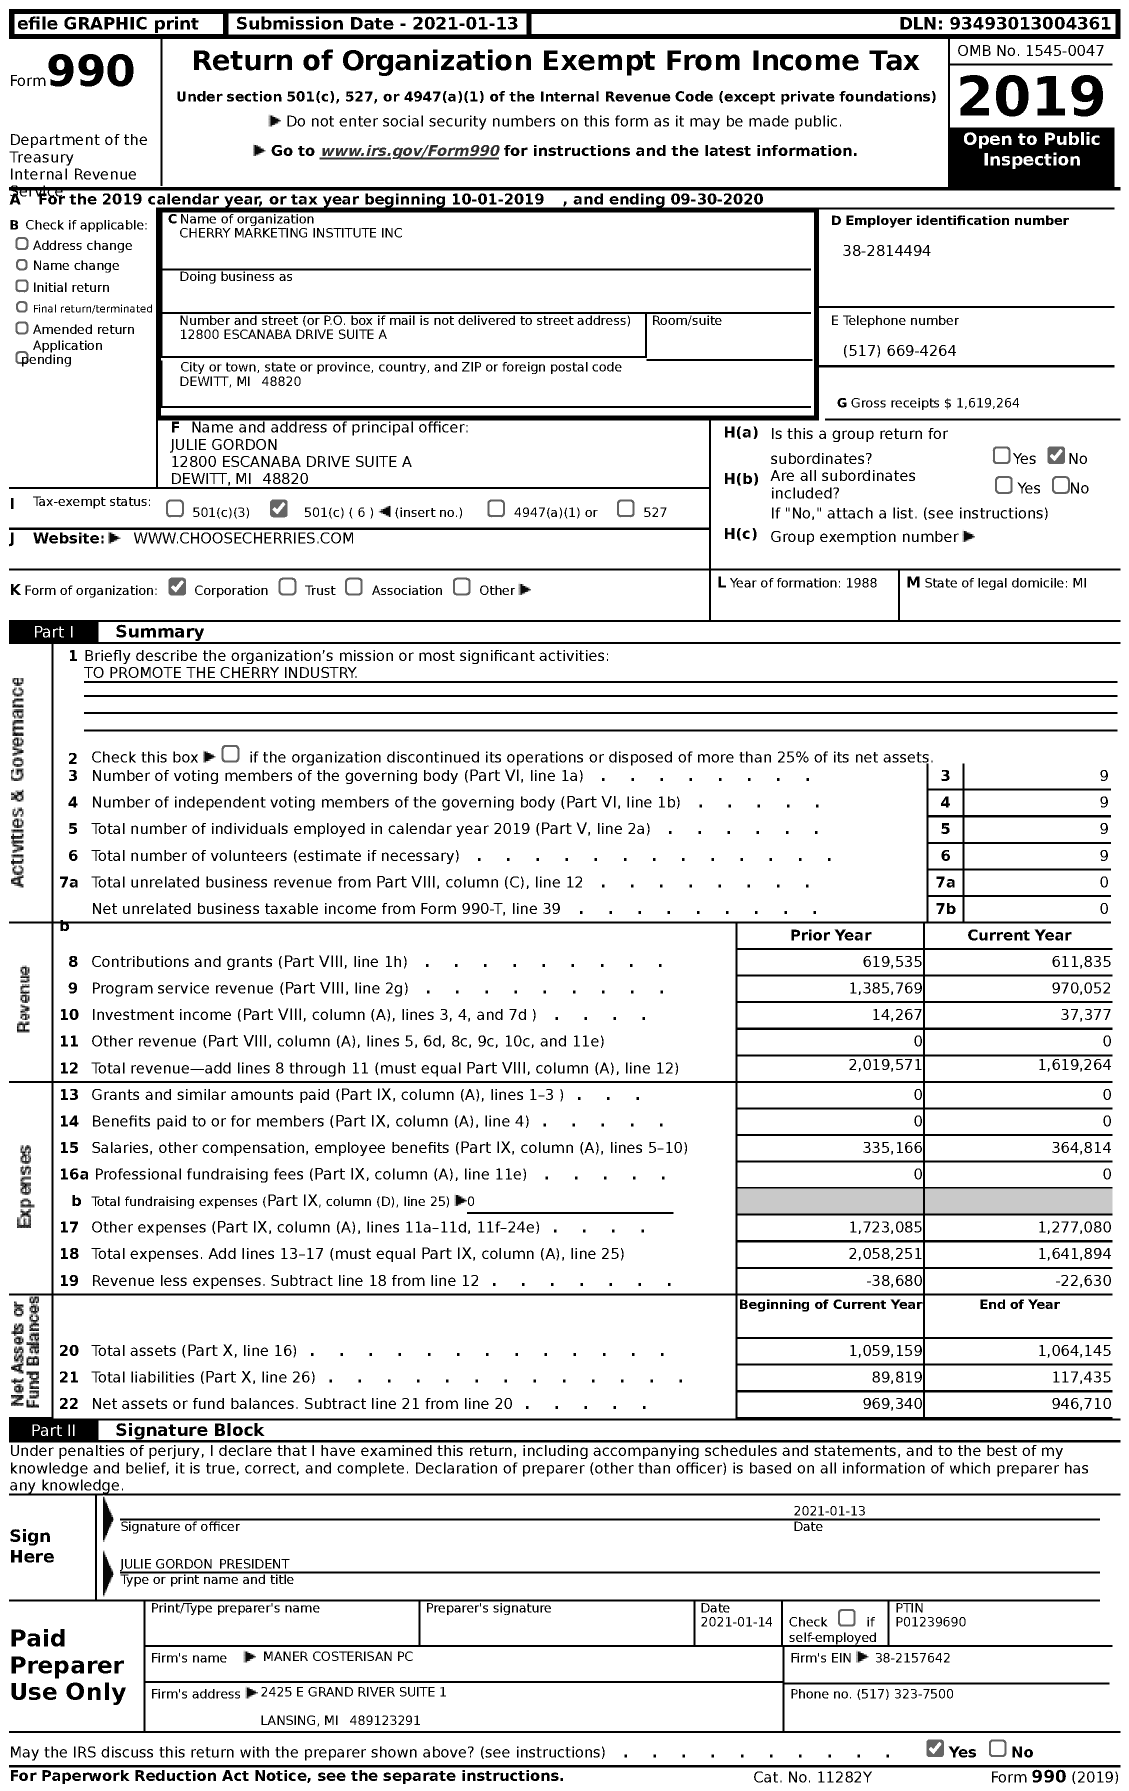 Image of first page of 2019 Form 990 for Cherry Marketing Institute (CMI)